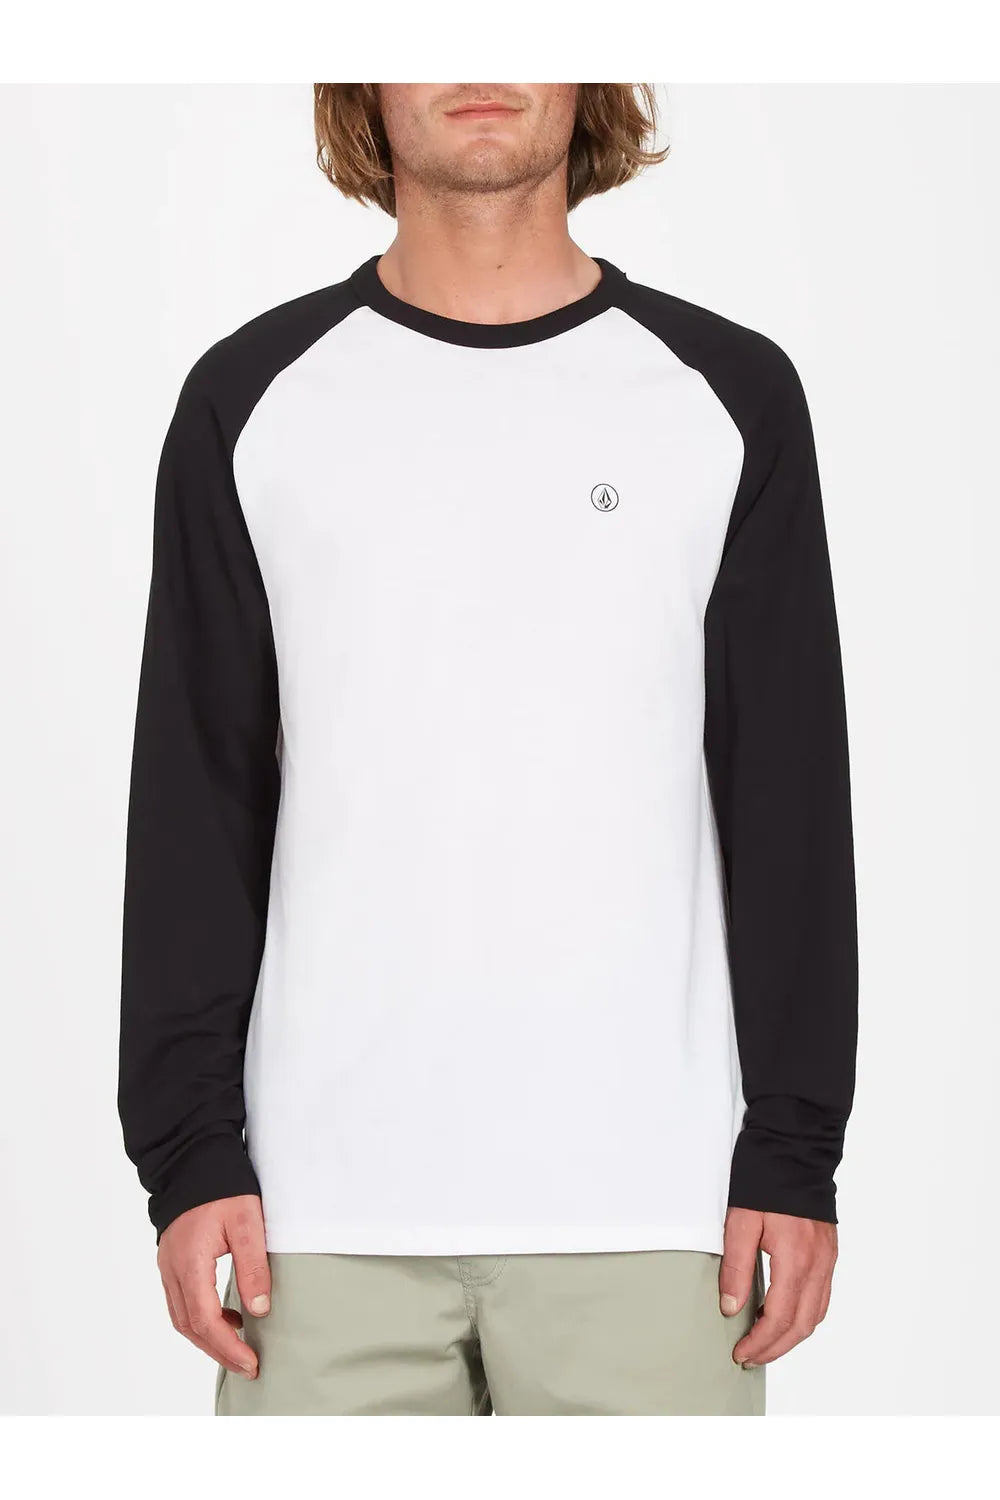 Adult Black and Gold Longsleeve Tee Charcoal / Small